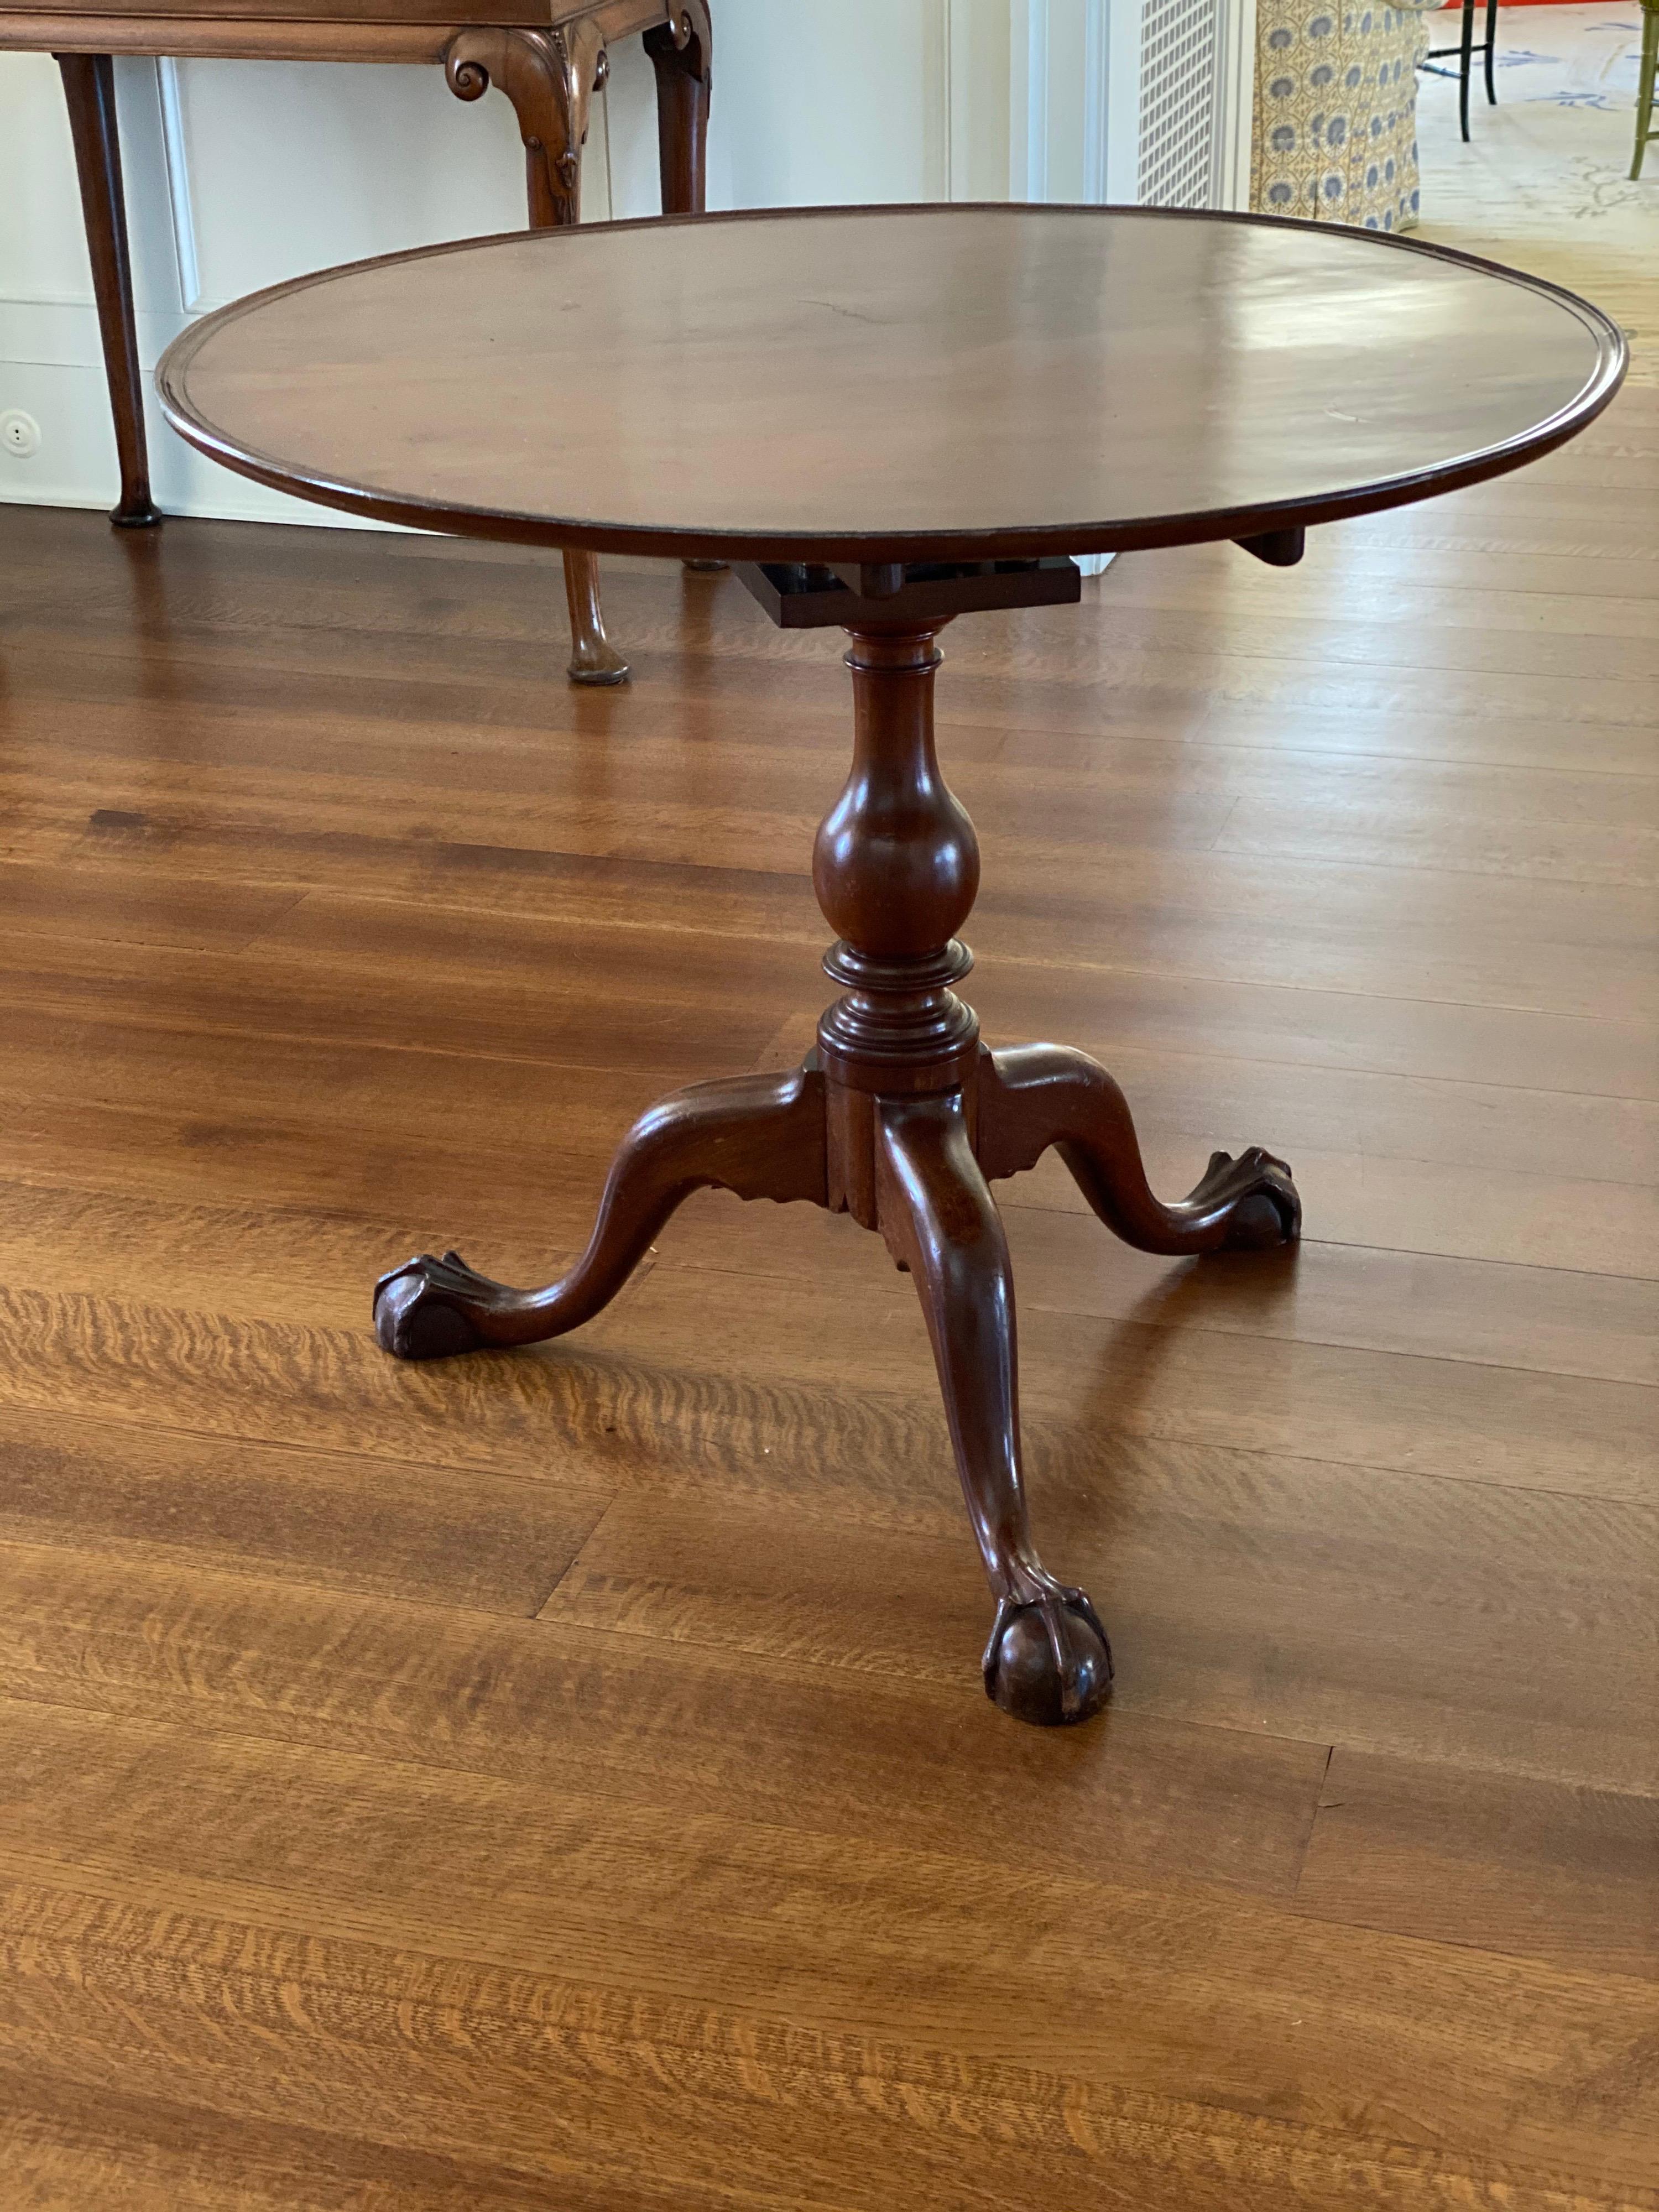 18th Century Chippendale Mahogany Dished Tilt-Top Tea Table, circa 1775 For Sale 2